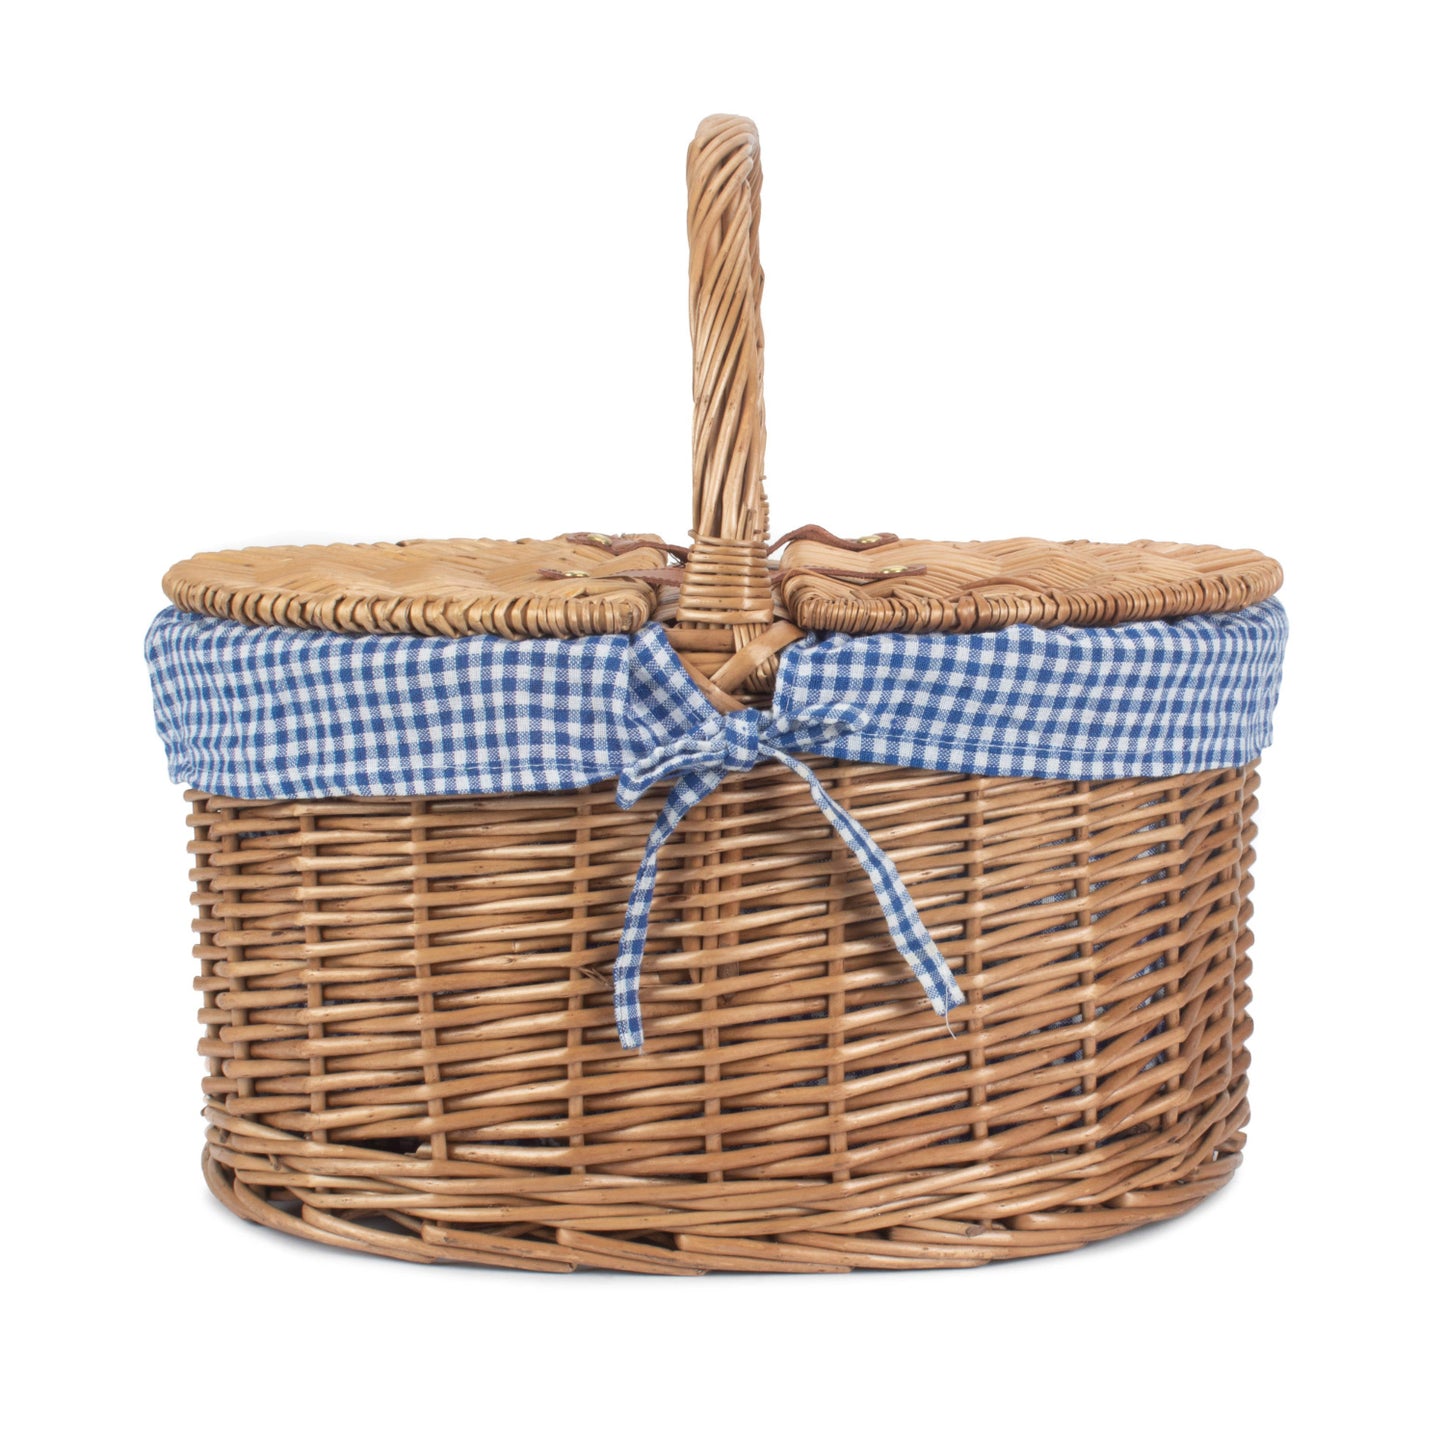 Light Steamed Oval Lidded Hamper With Blue & White Checked Lining